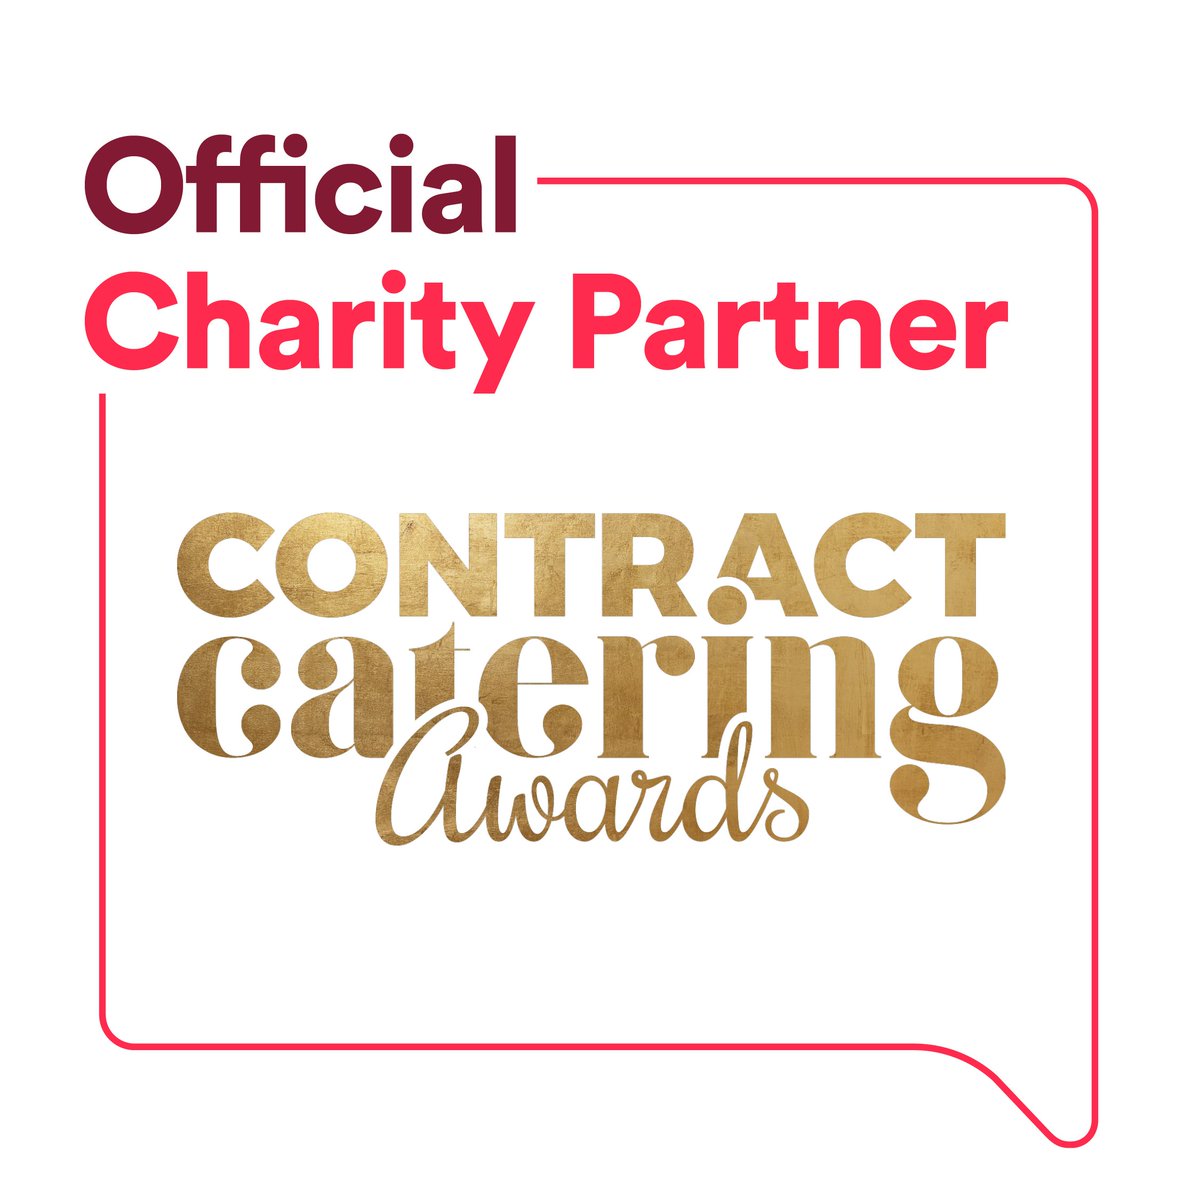 We are honoured to be @CCateringMag charity partner at the #contractcateringawards this evening. Best of luck to all the nominees & thank you in advance for your generosity. #wevegotyou